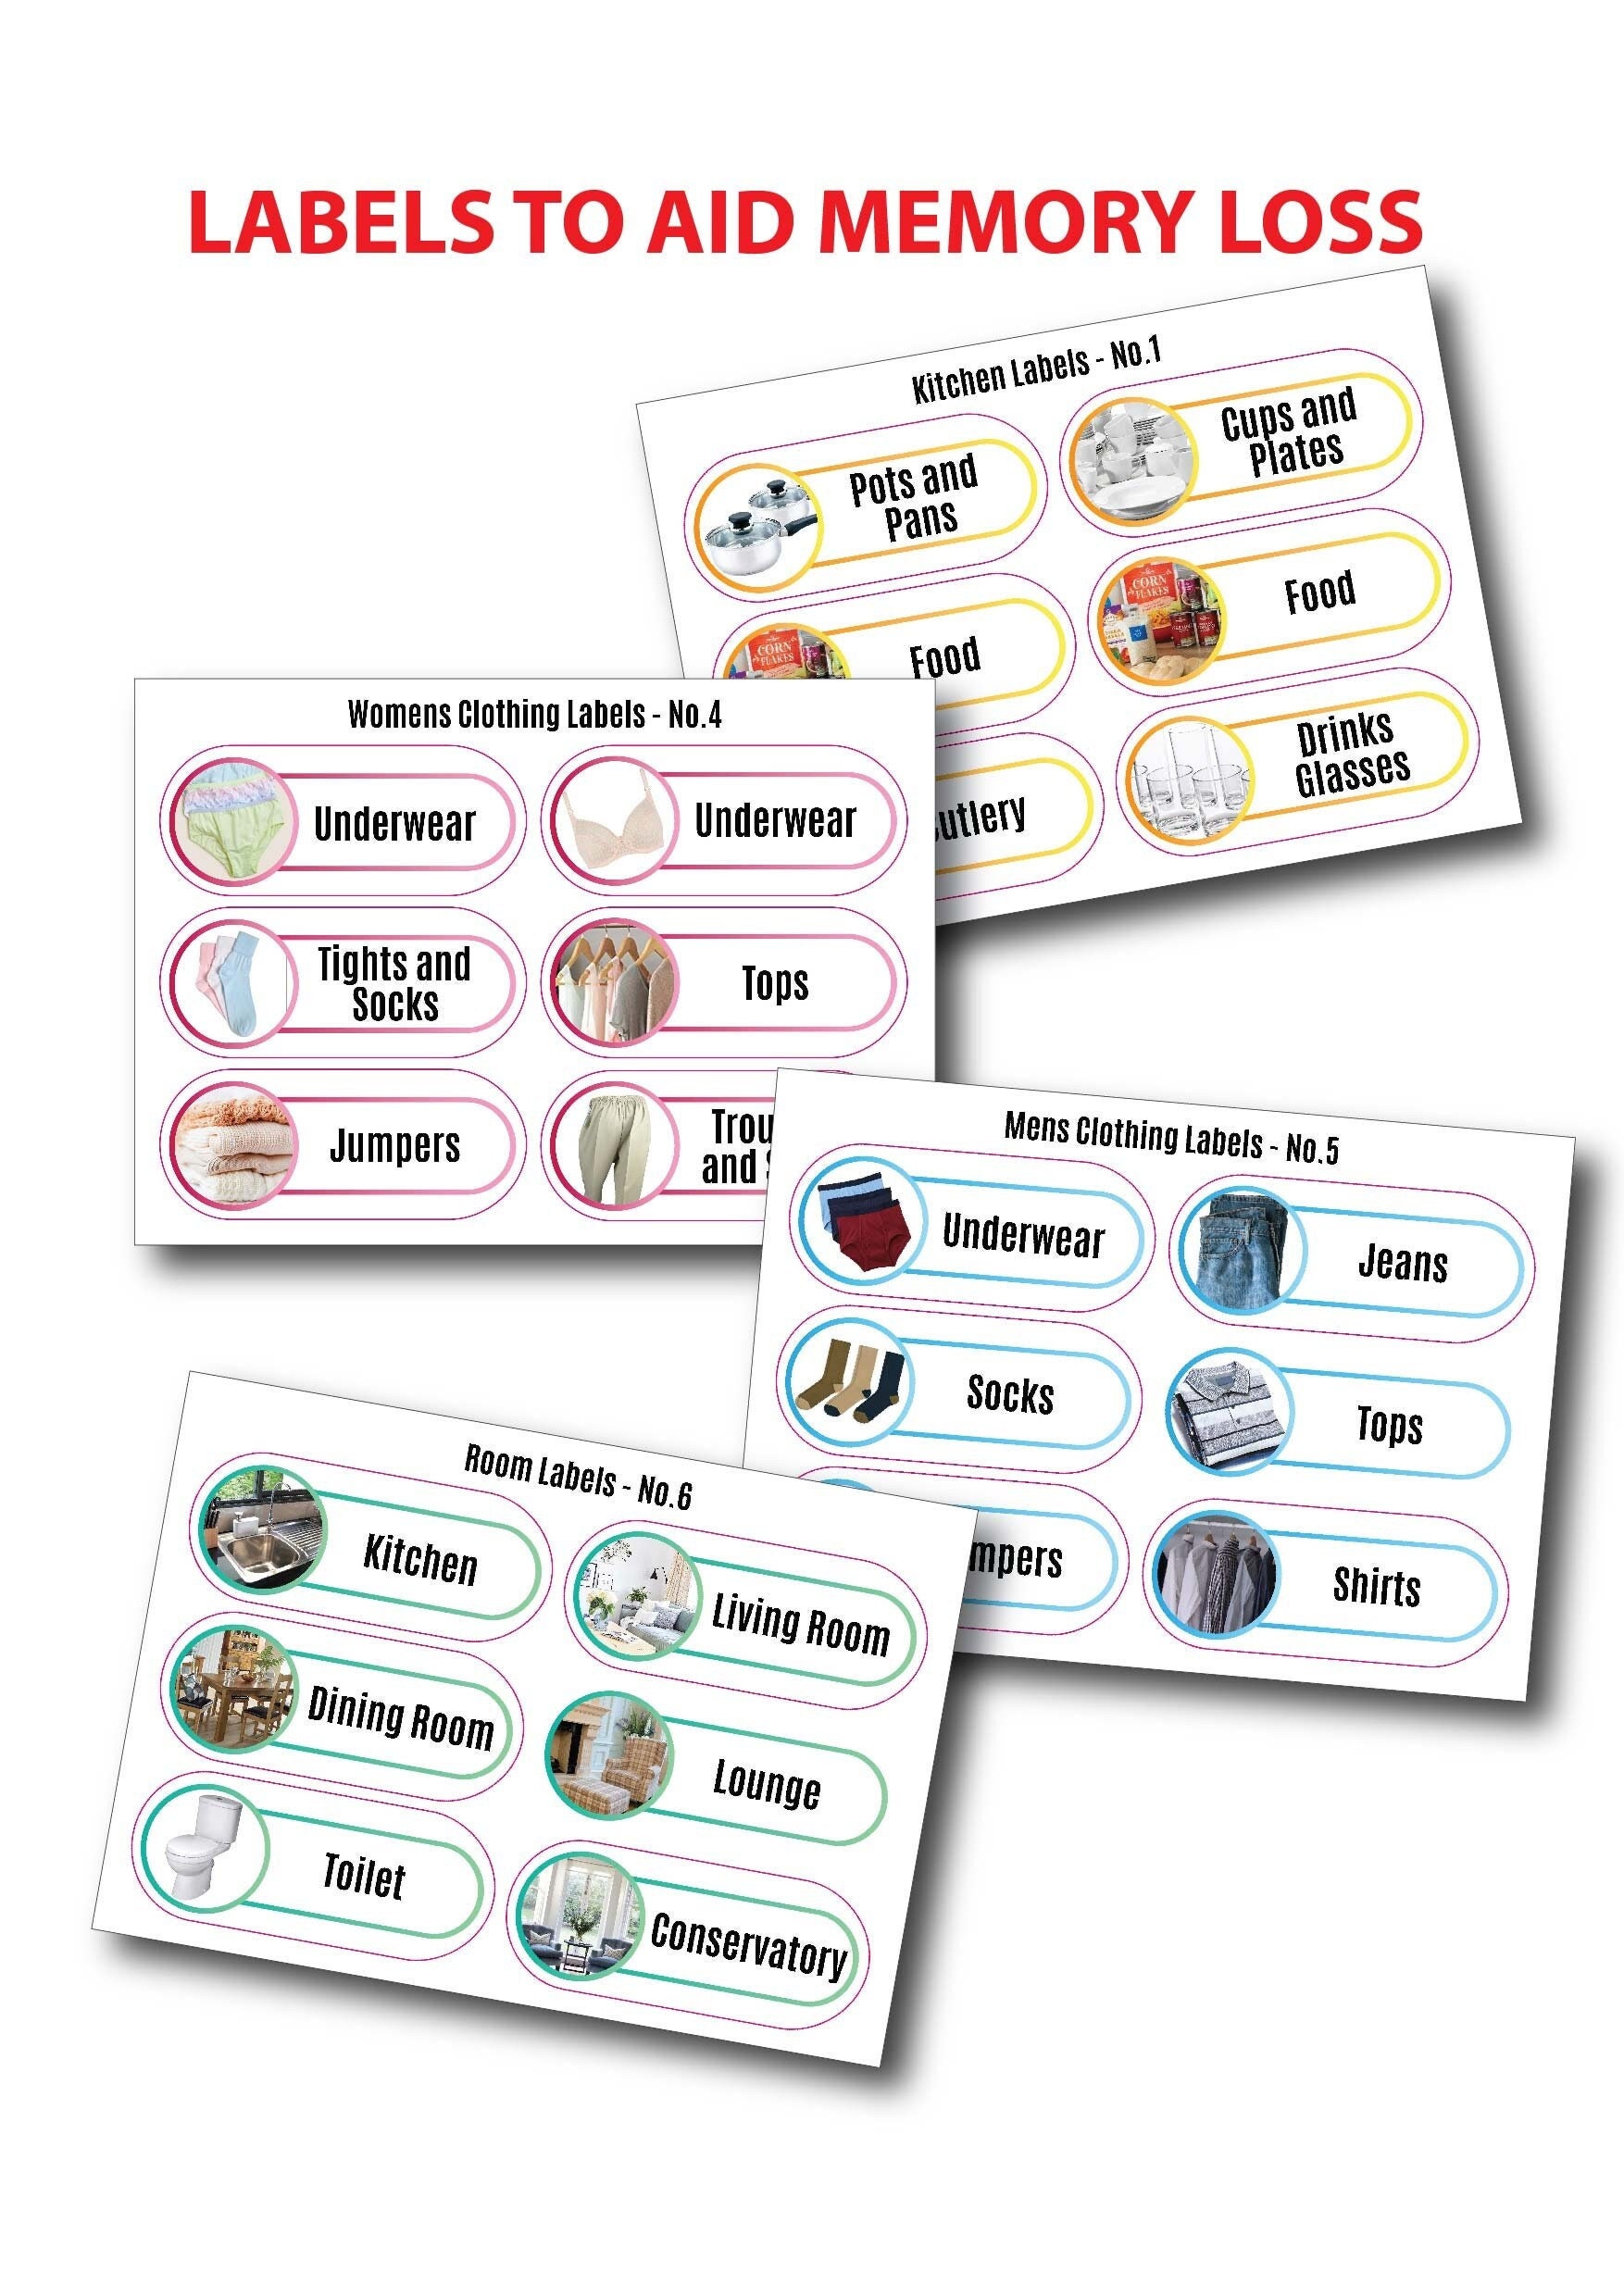 Free Printable - Clothing Labels for Dementia Caregivers - DementiaWho!